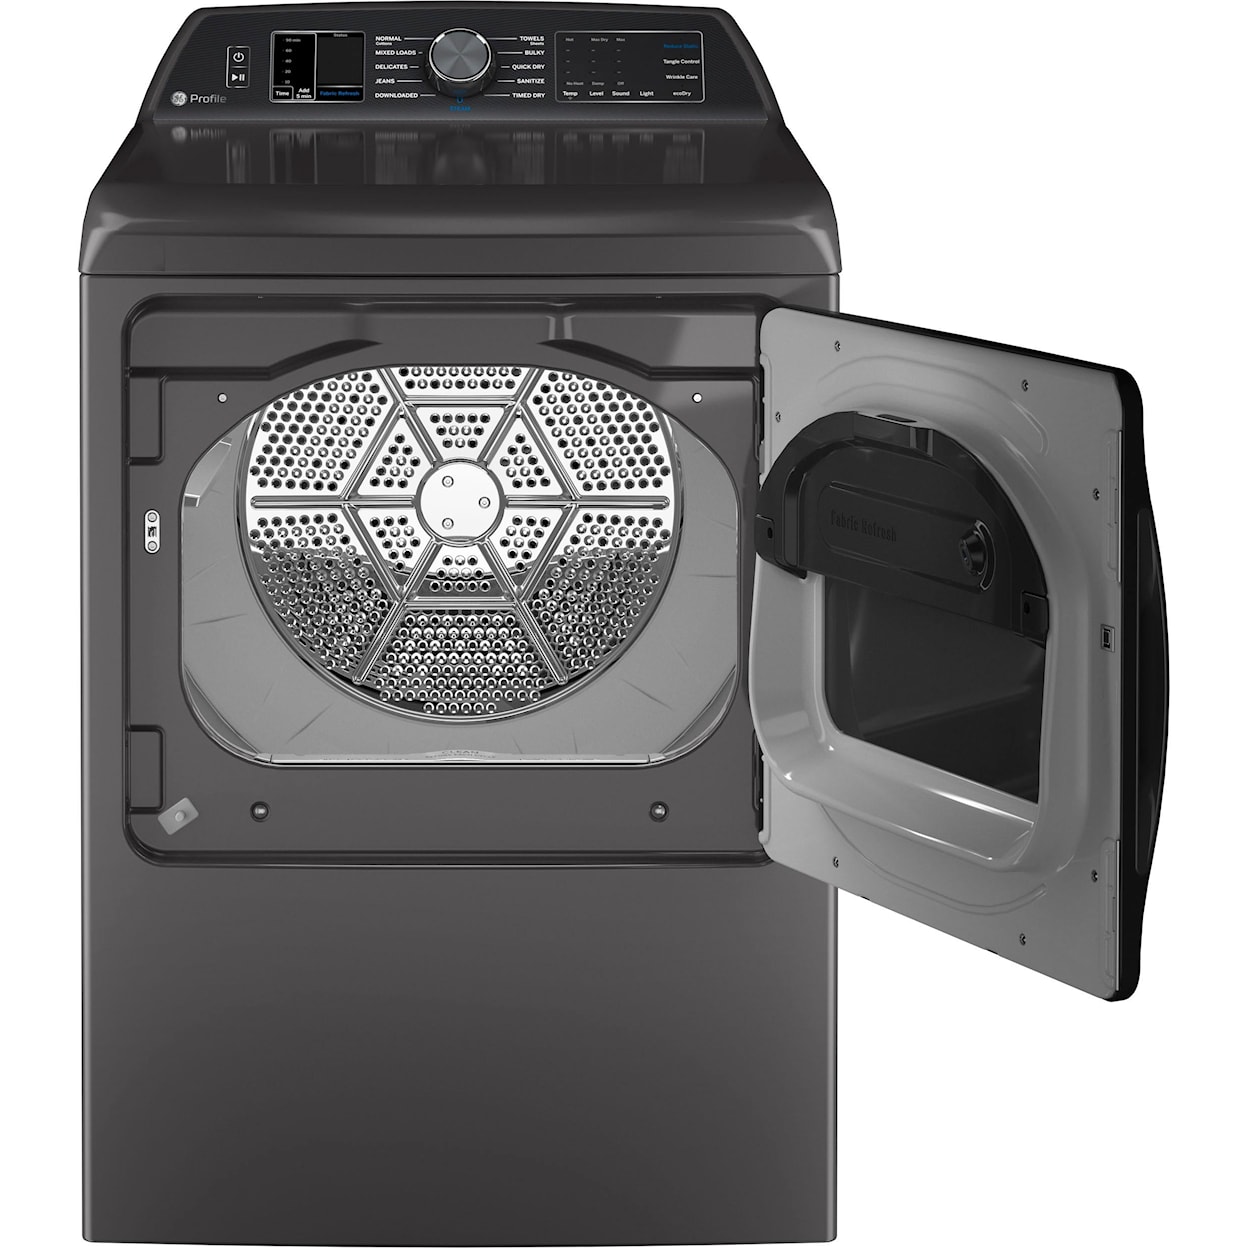 GE Appliances Laundry Top Load Matching Electric Dryer